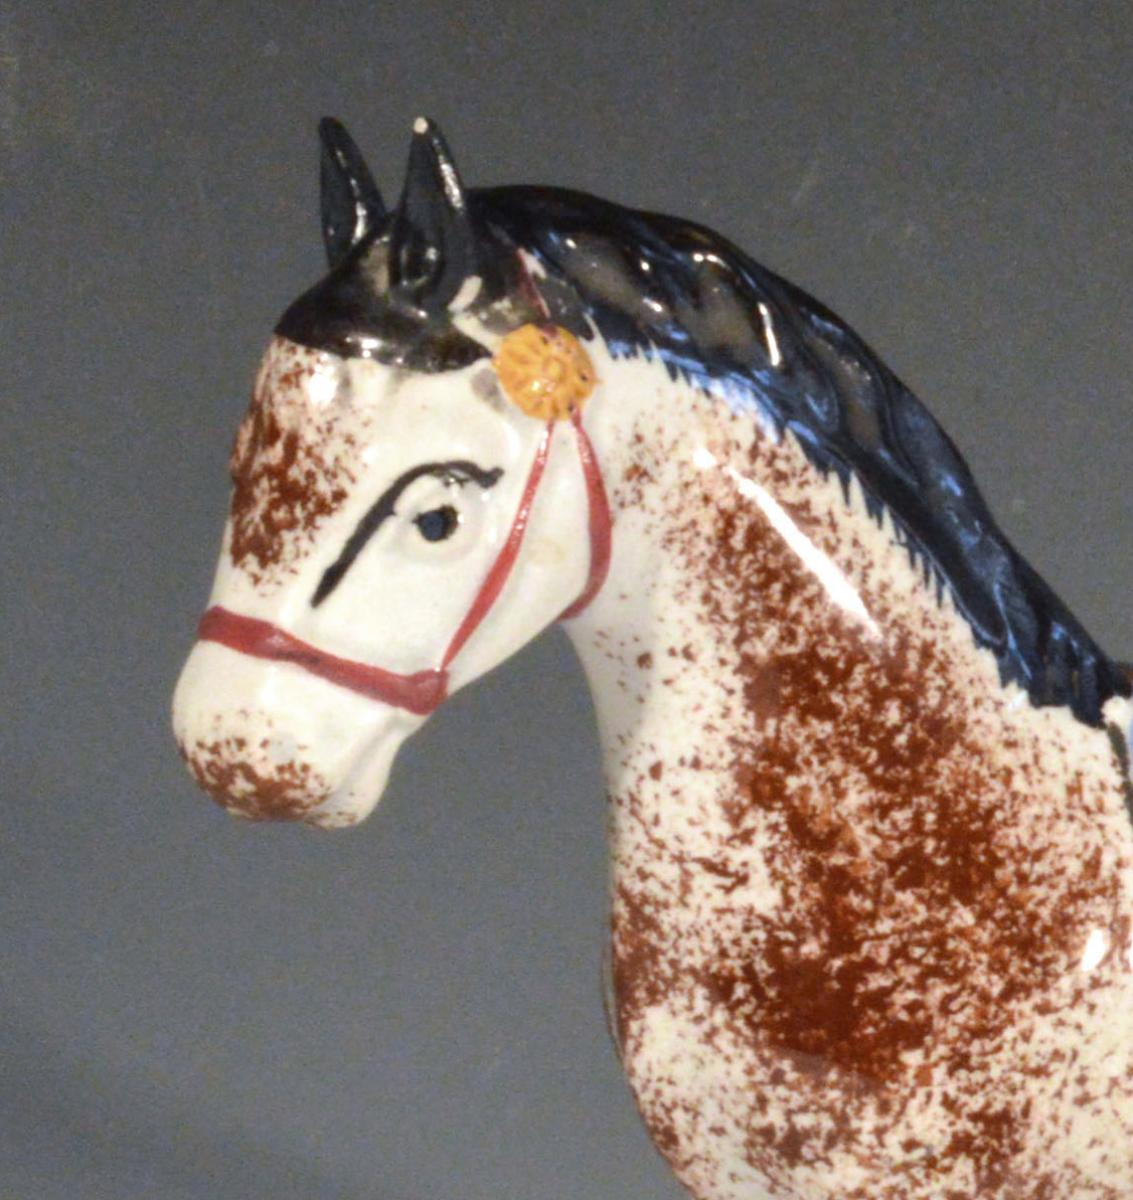 Newcastle Prattware Pottery Model of a Horse, Attributed to St. Anthony Pottery, Newcastle upon Tyne. Circa 1800-20.